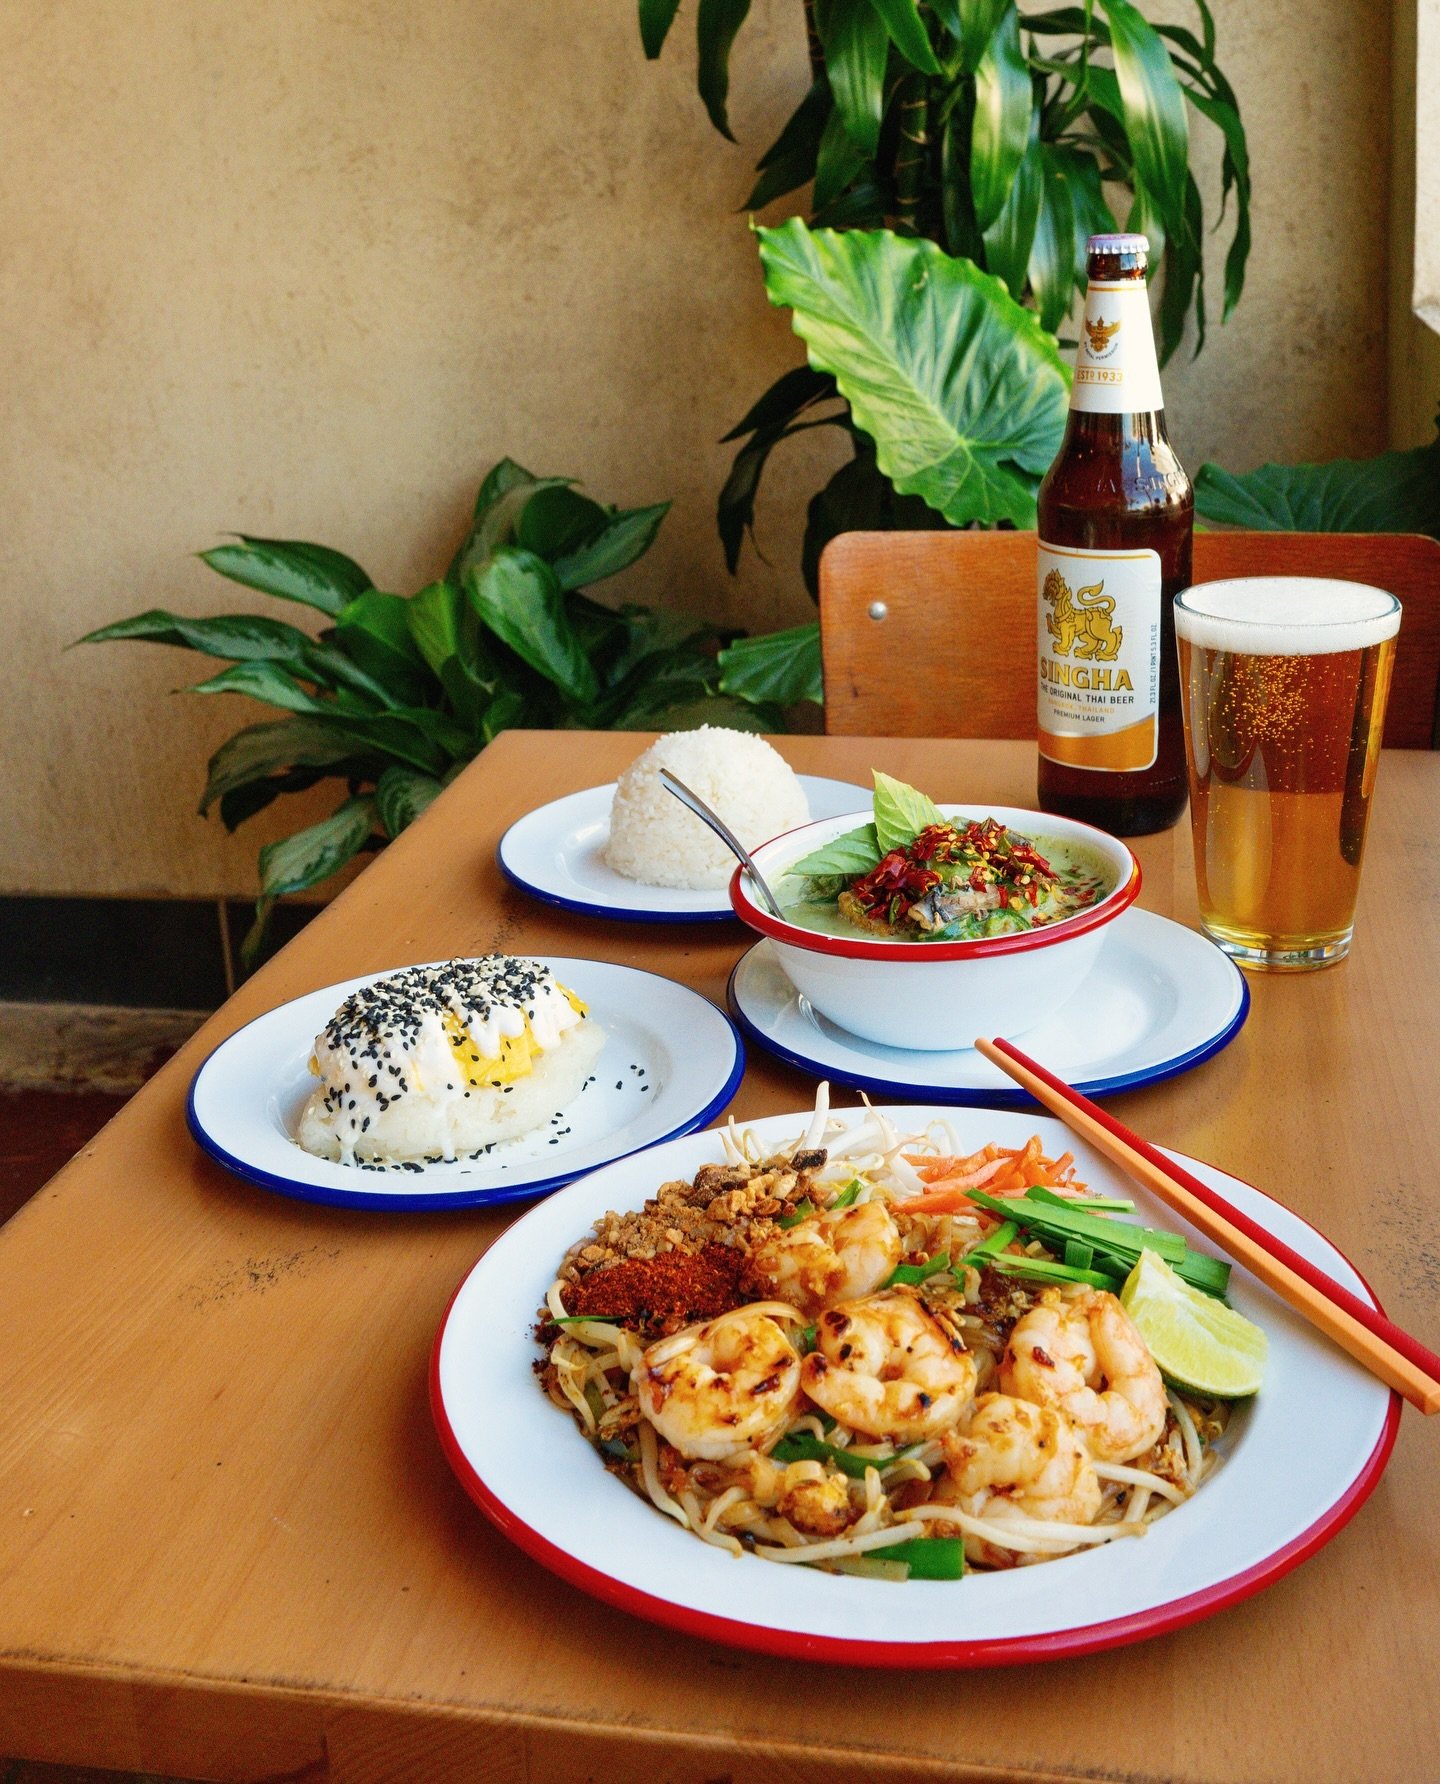 Have you had lunch at Sticky Rice on 3rd st yet?